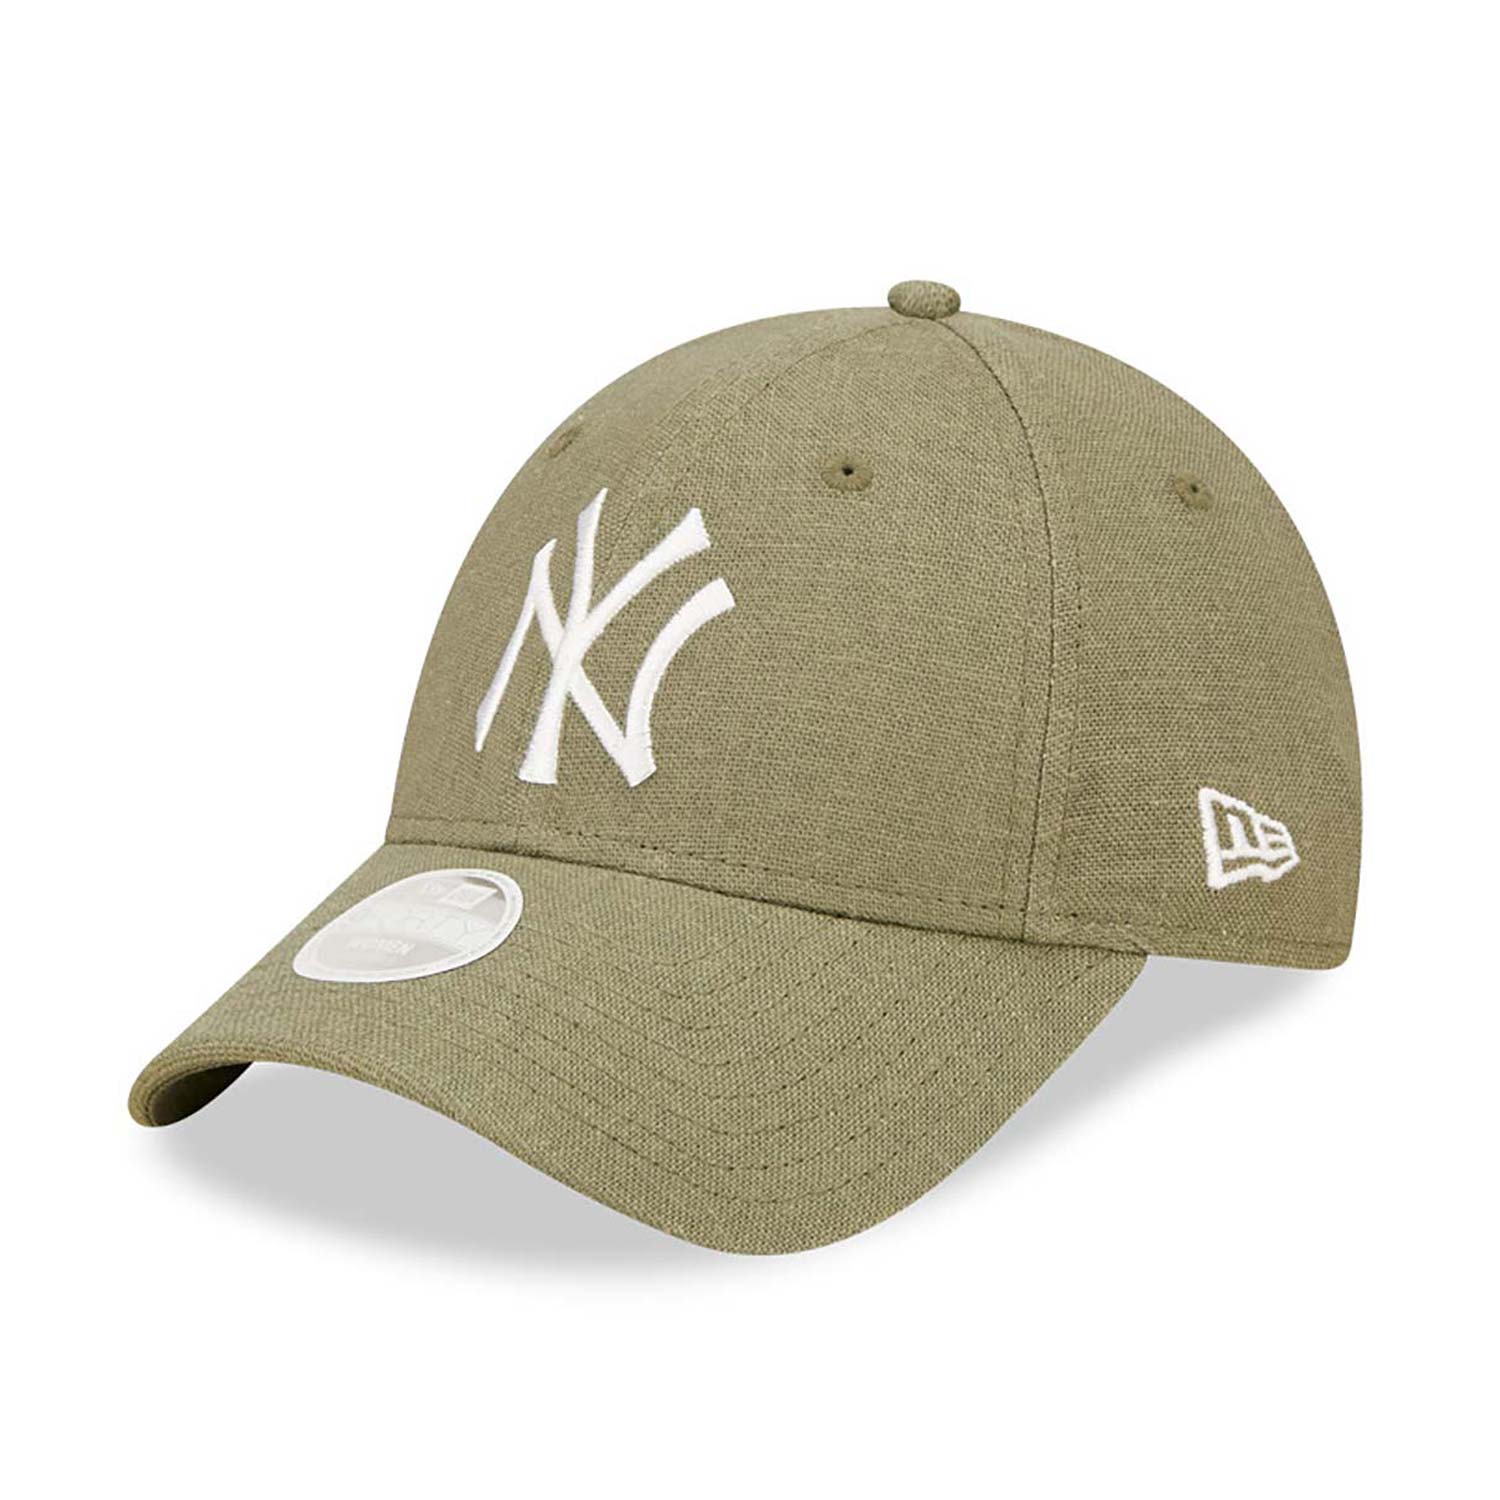 New Era New York Yankees Brown White Linen Edition 9Forty Strapback Hat, CURVED HATS, CAPS